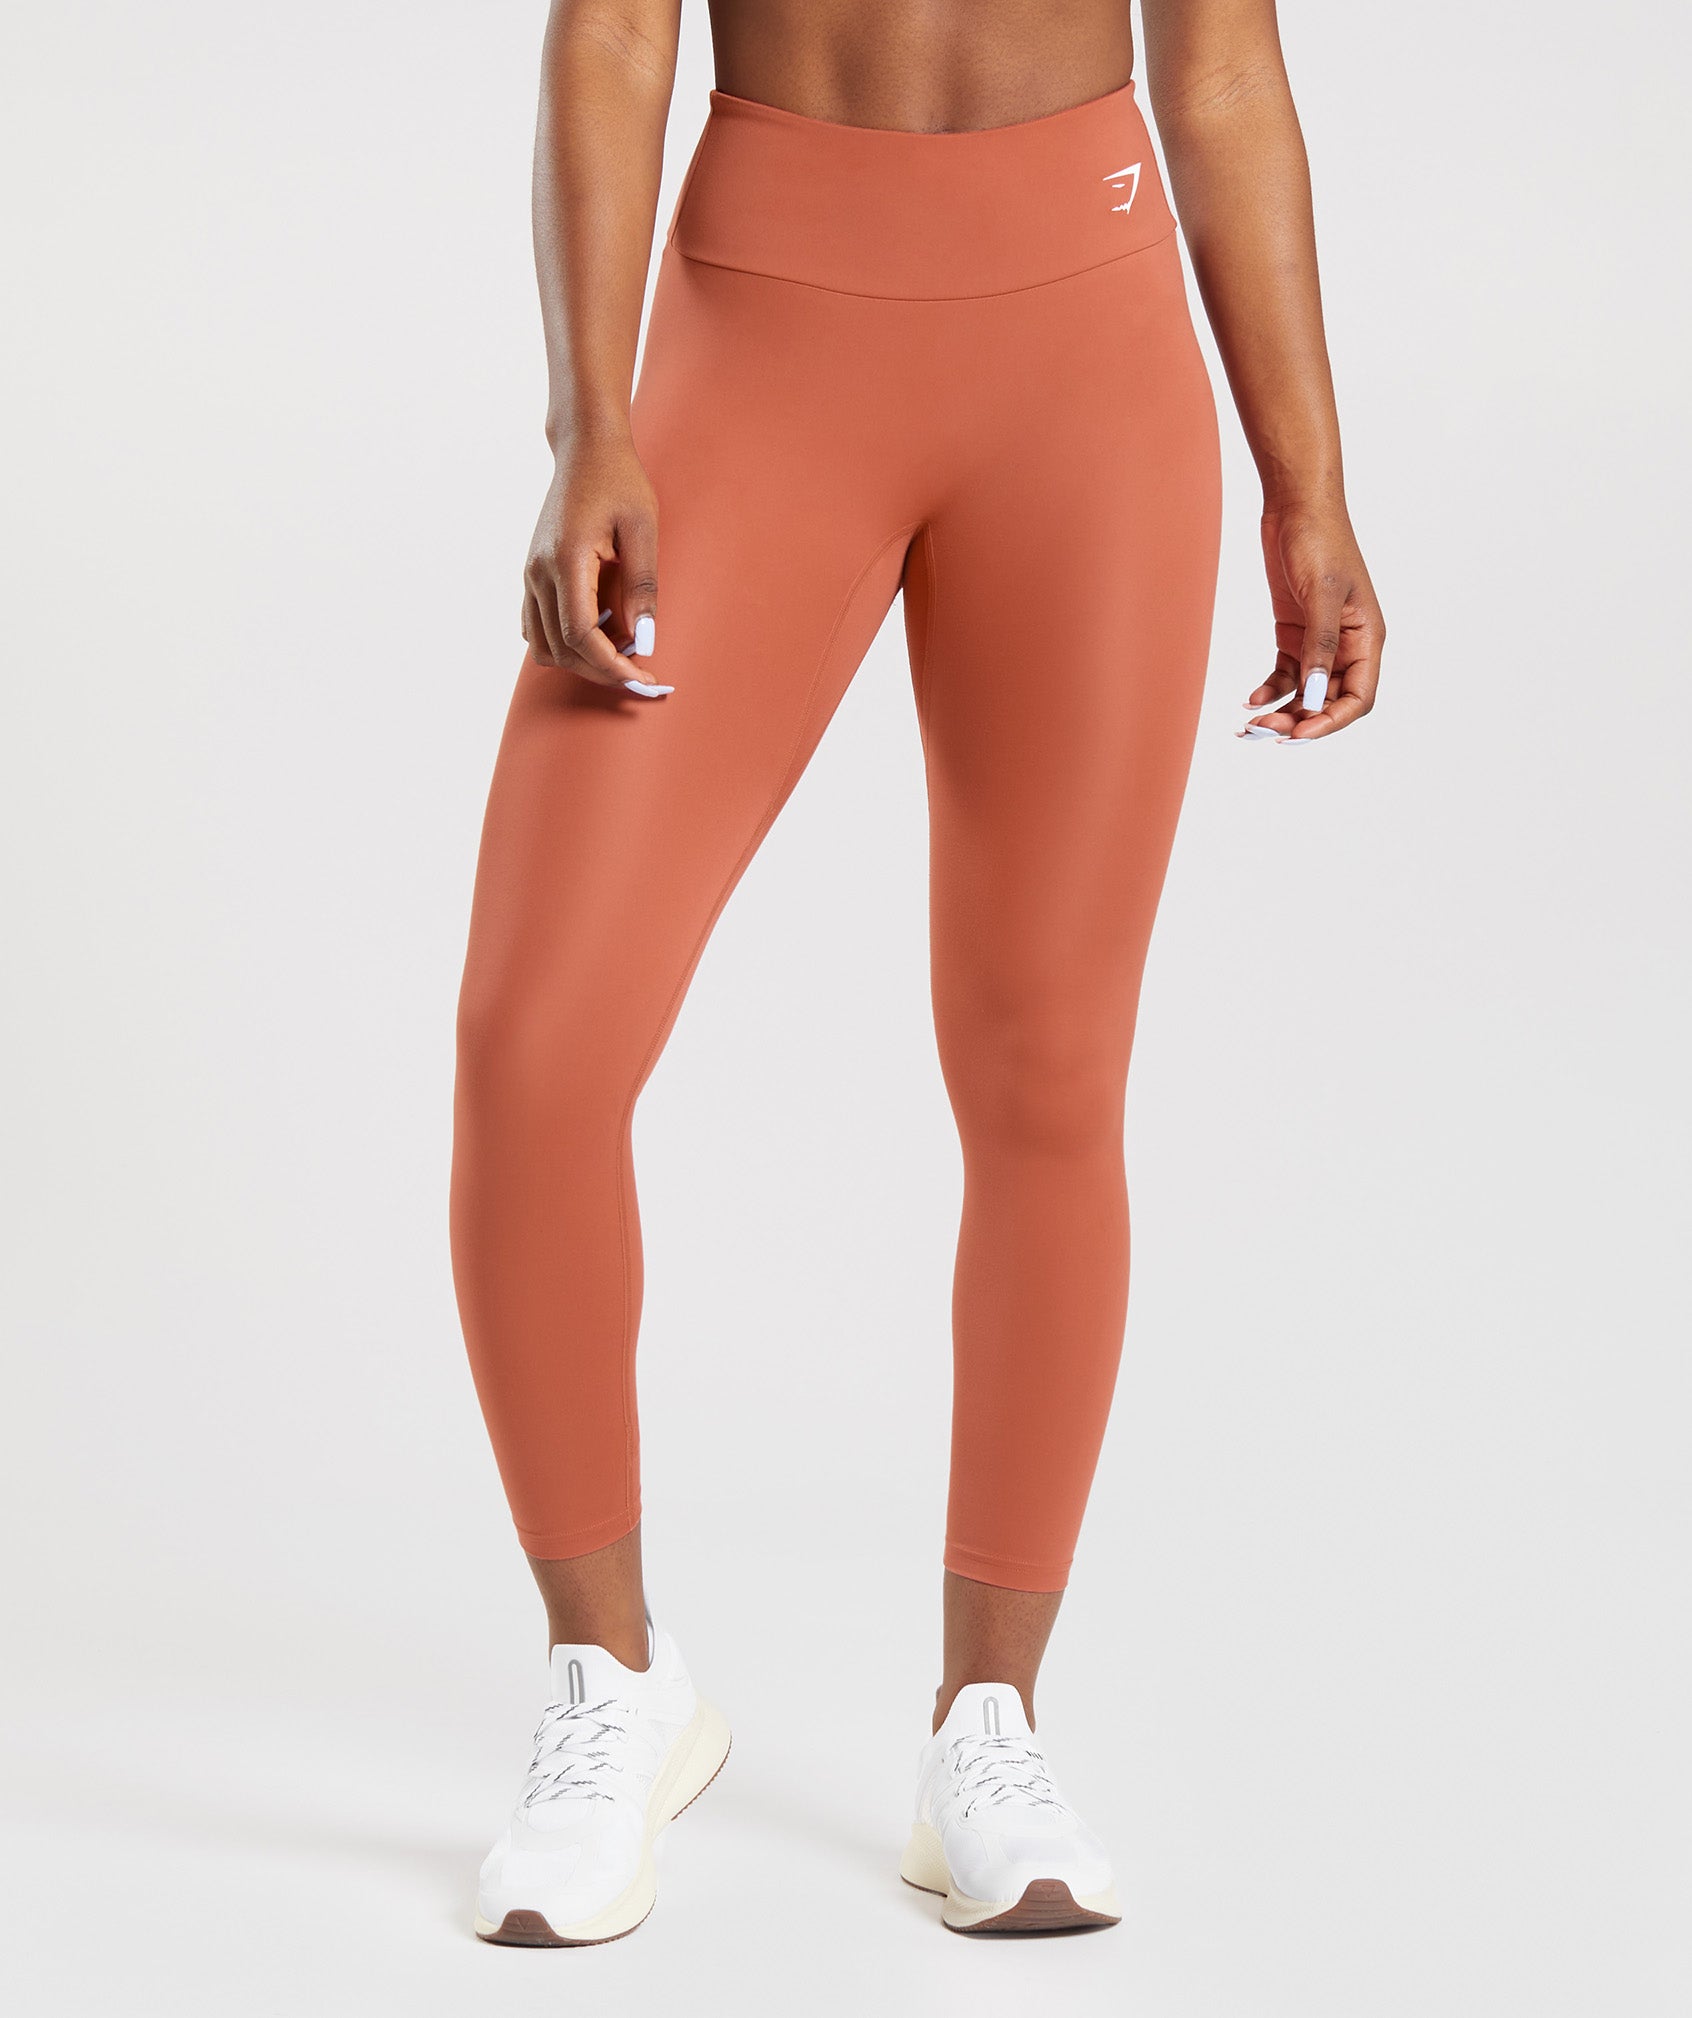 Thight / sport leggins size S in red from Prozis (european sport brand)